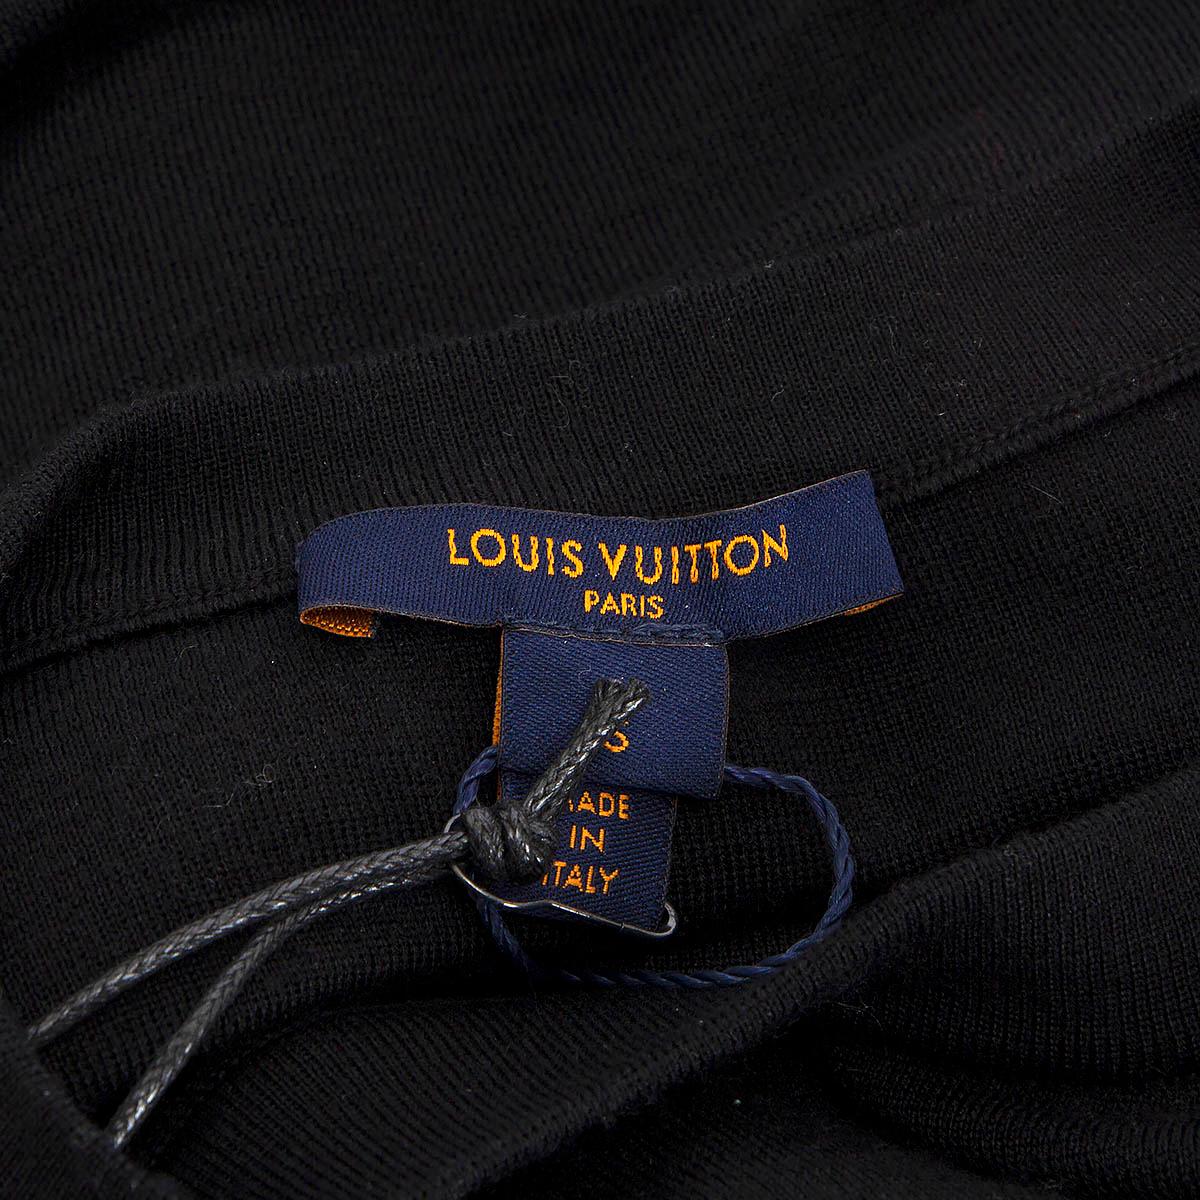 LOUIS VUITTON black cashmere blend GOLD EMBROIDERED Sweater S For Sale 2